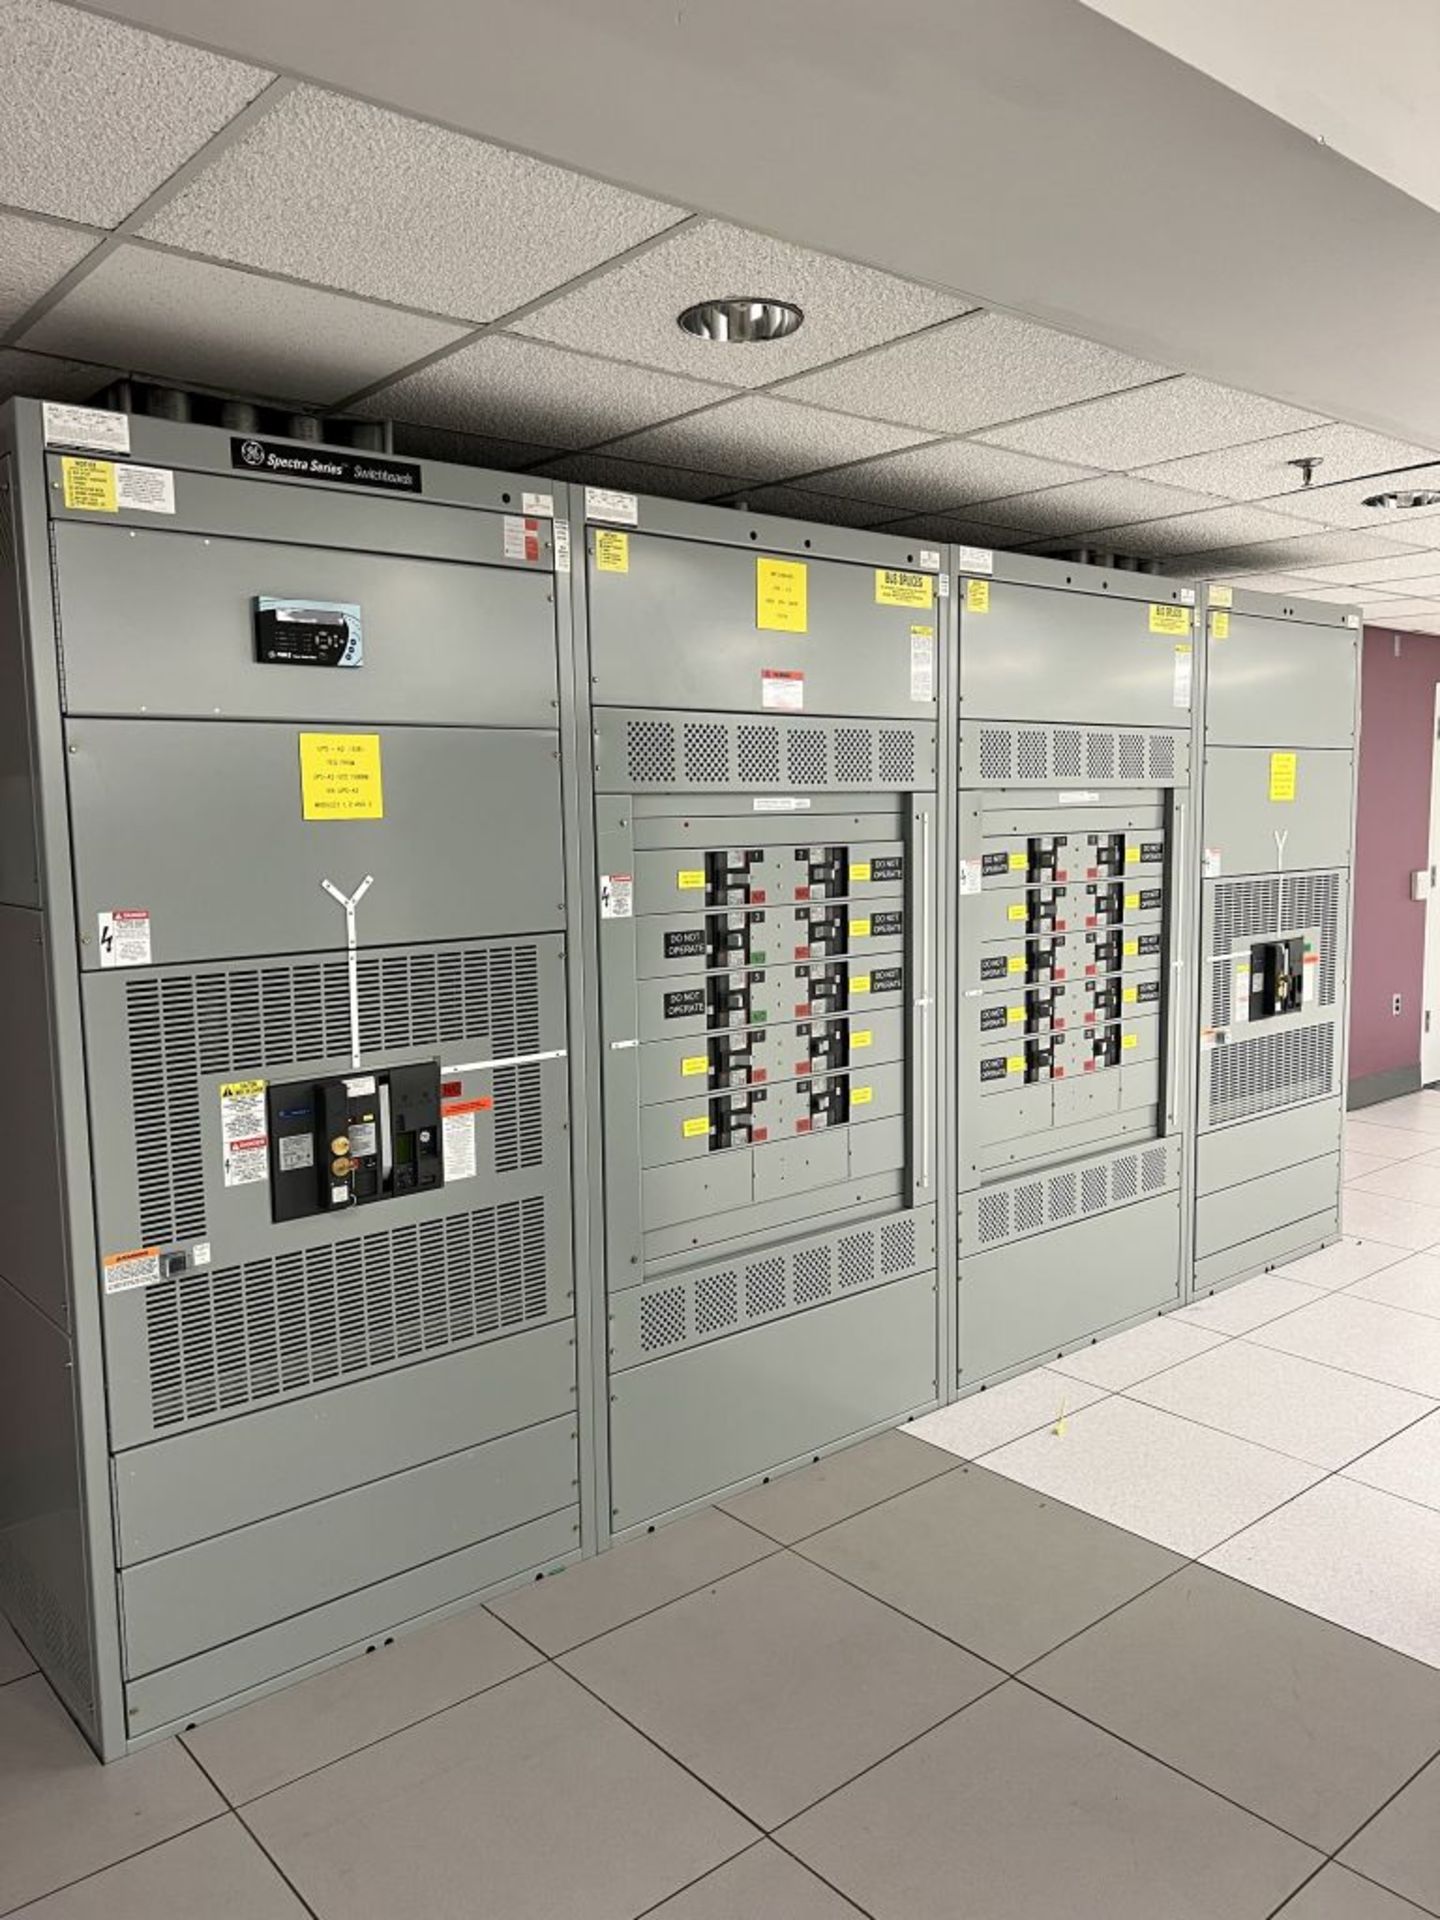 Charlotte, NC - GE 3000A Spectra Series Switchboard